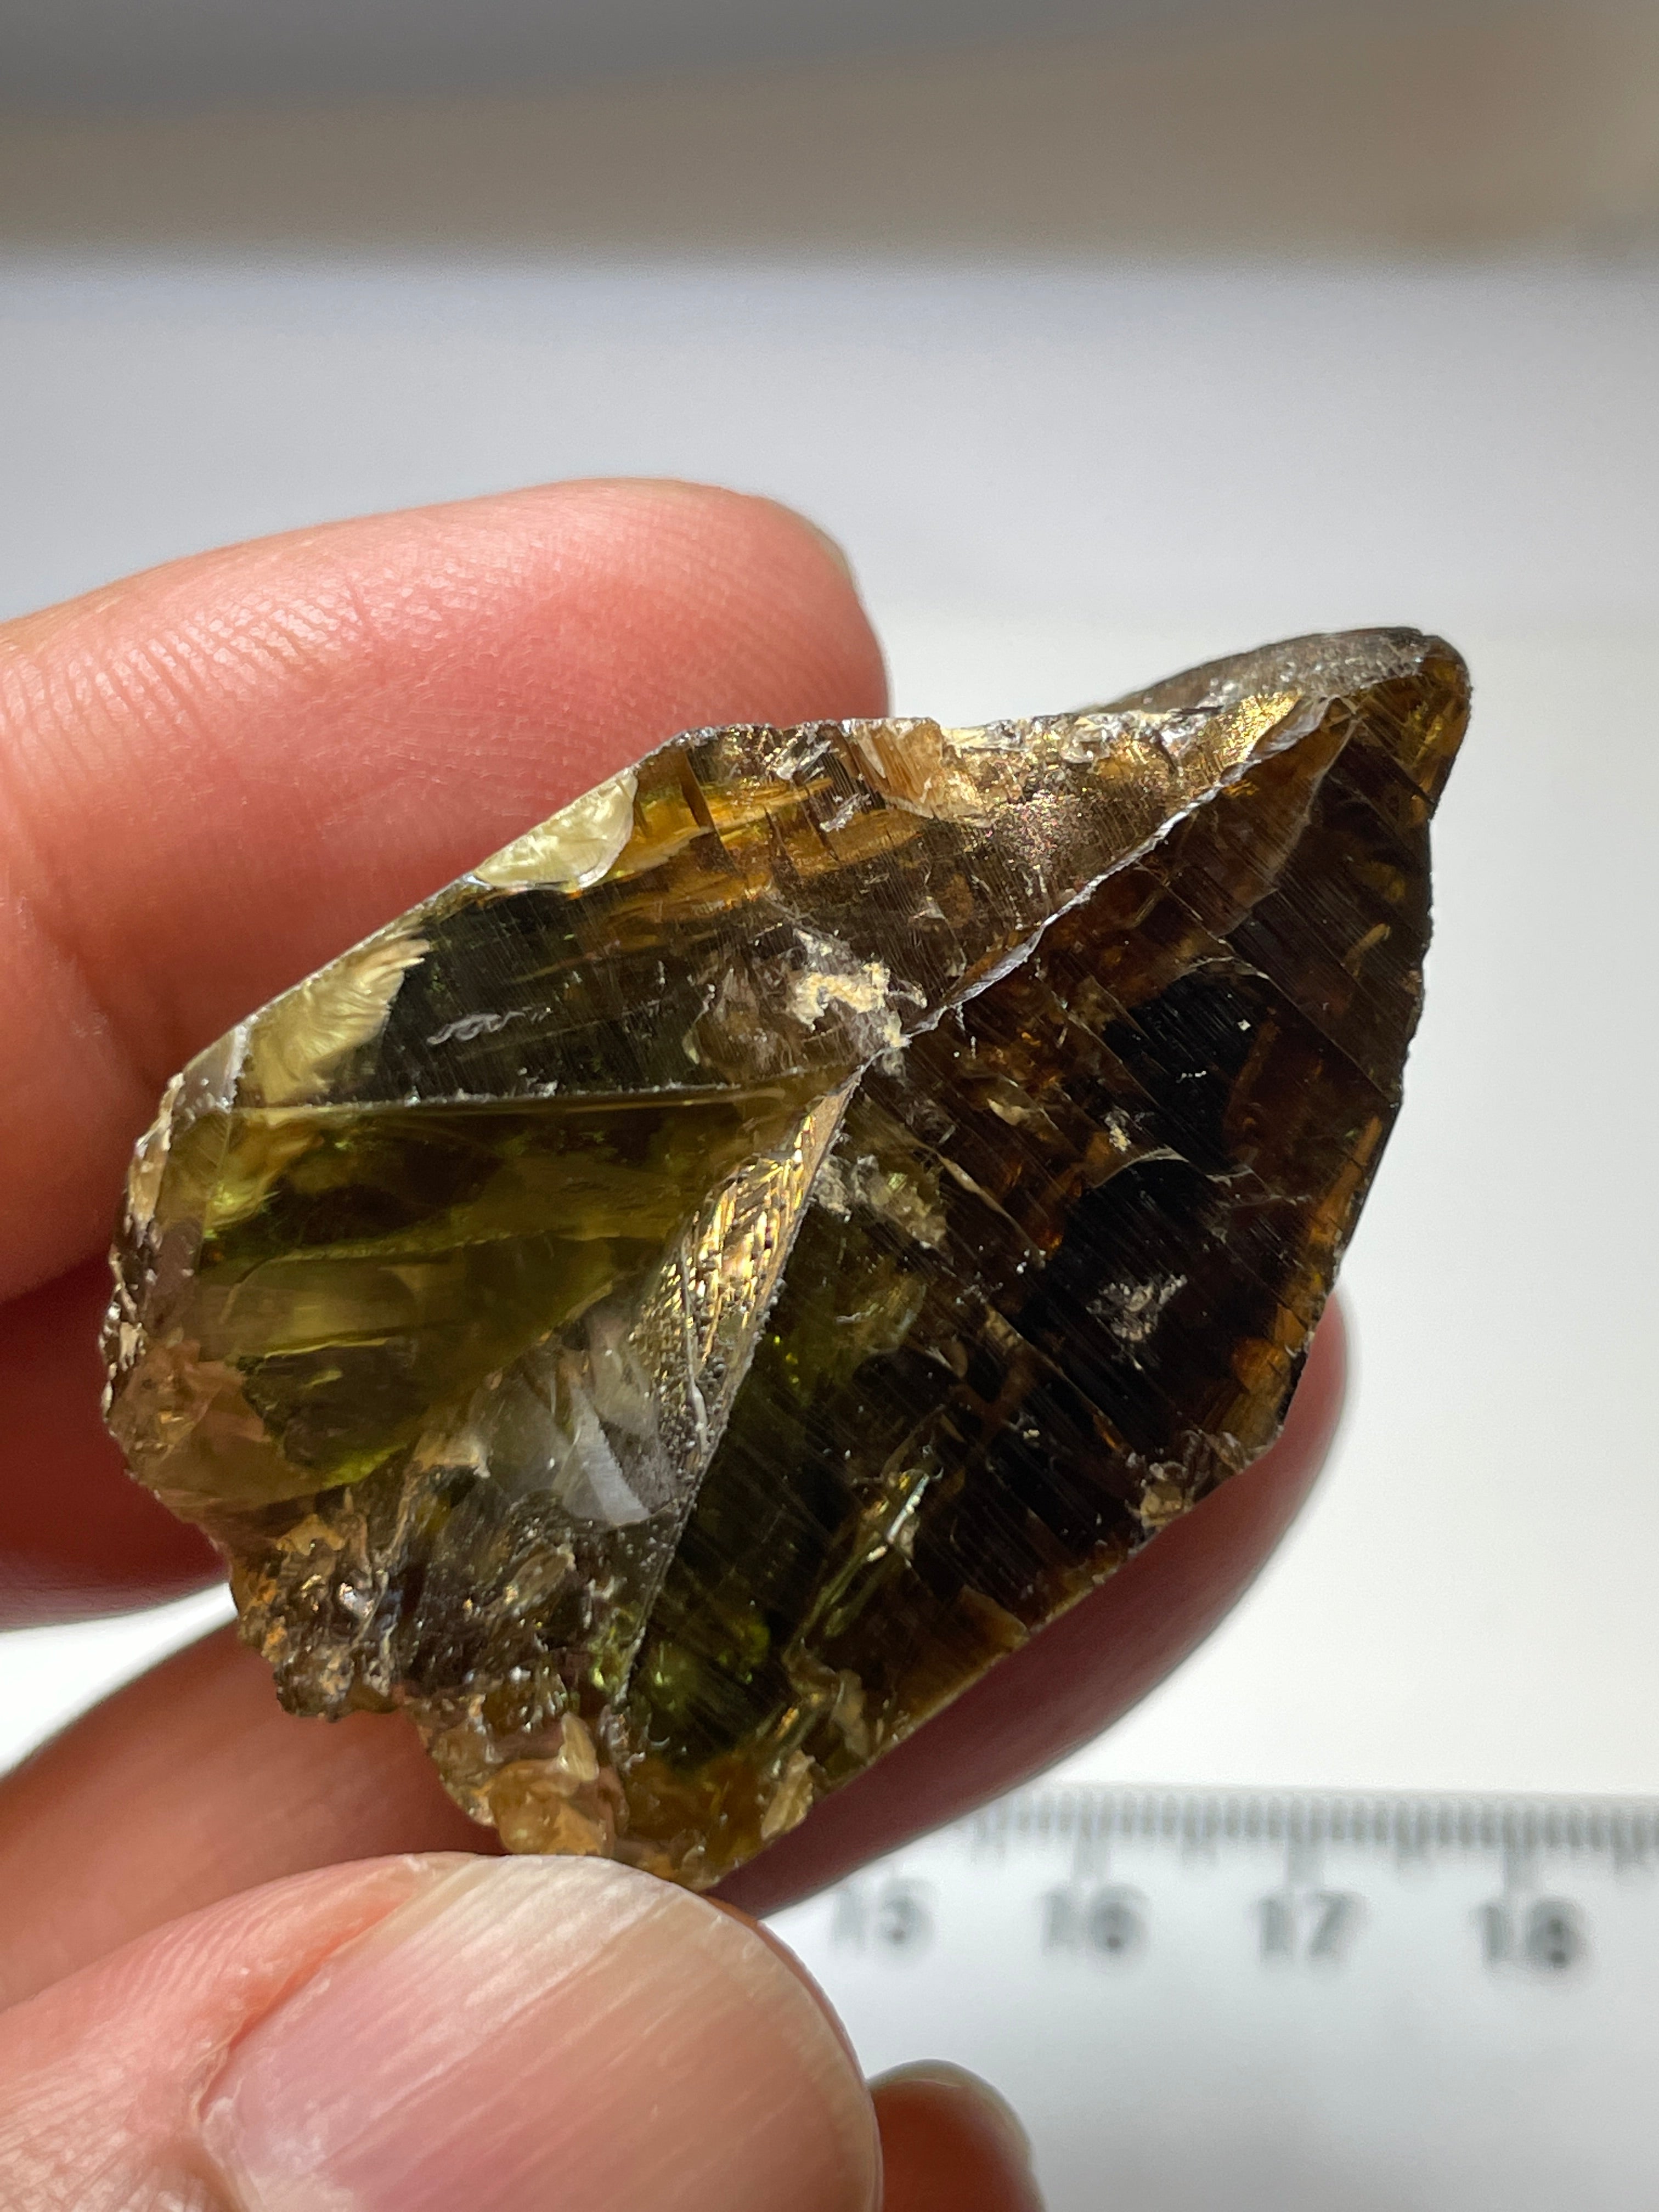 176.97Ct / 35.39Gm Tanzanian Sphene Crystal Untreated Unheated. 44.0 X 27.0 23.1Mm Very High End